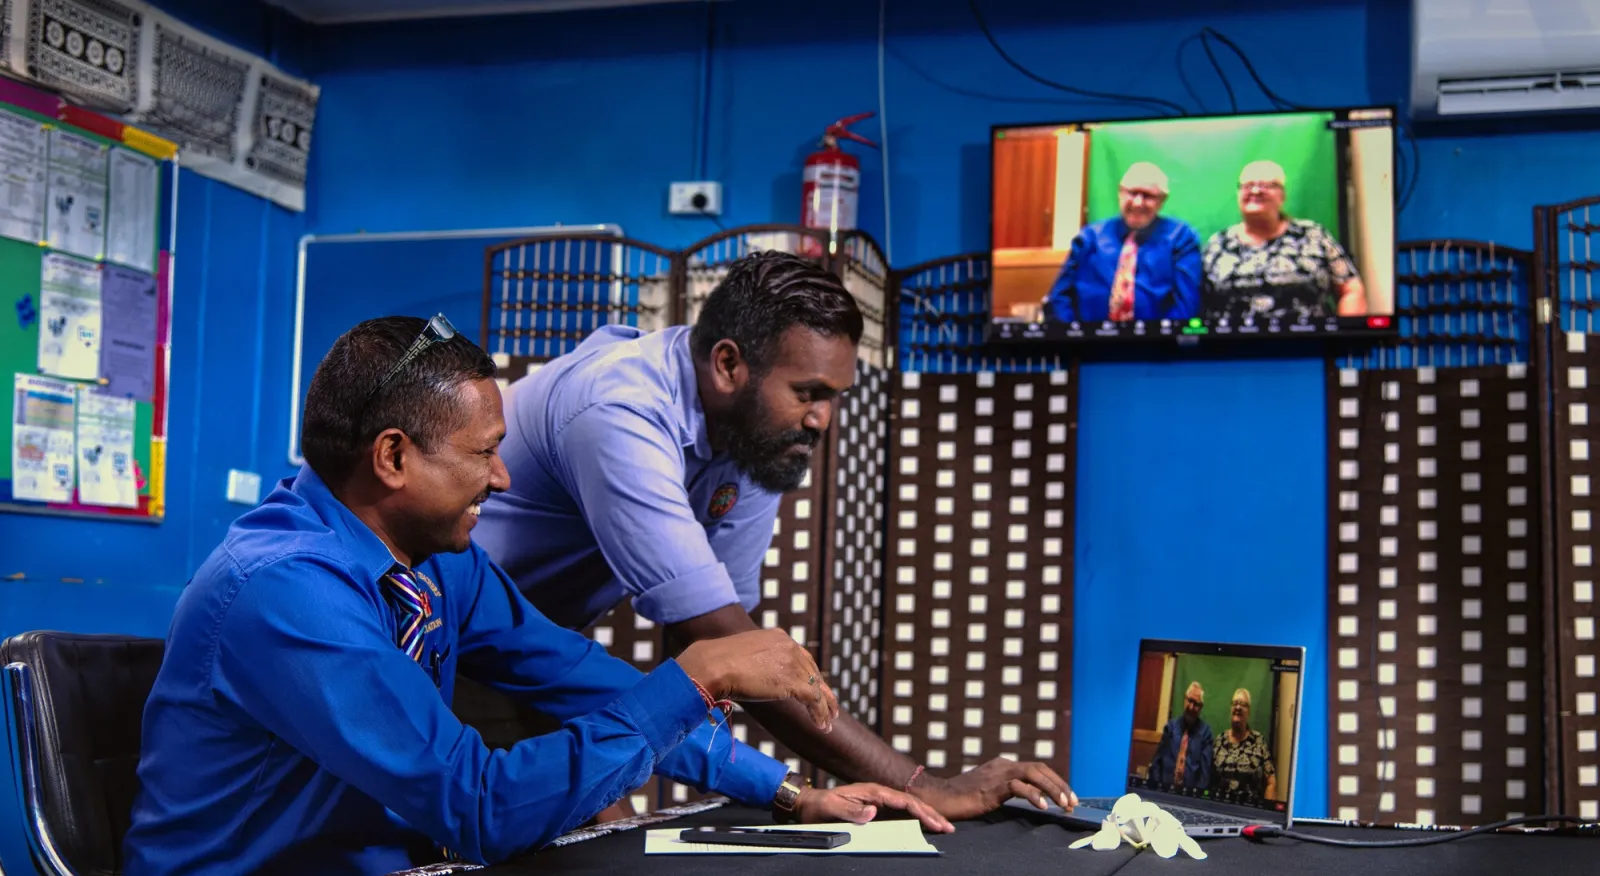 Two men sit at a desktop in a very blue room, working on a laptop. On the laptop a zoom screen is present with two people sitting and facing the camera.